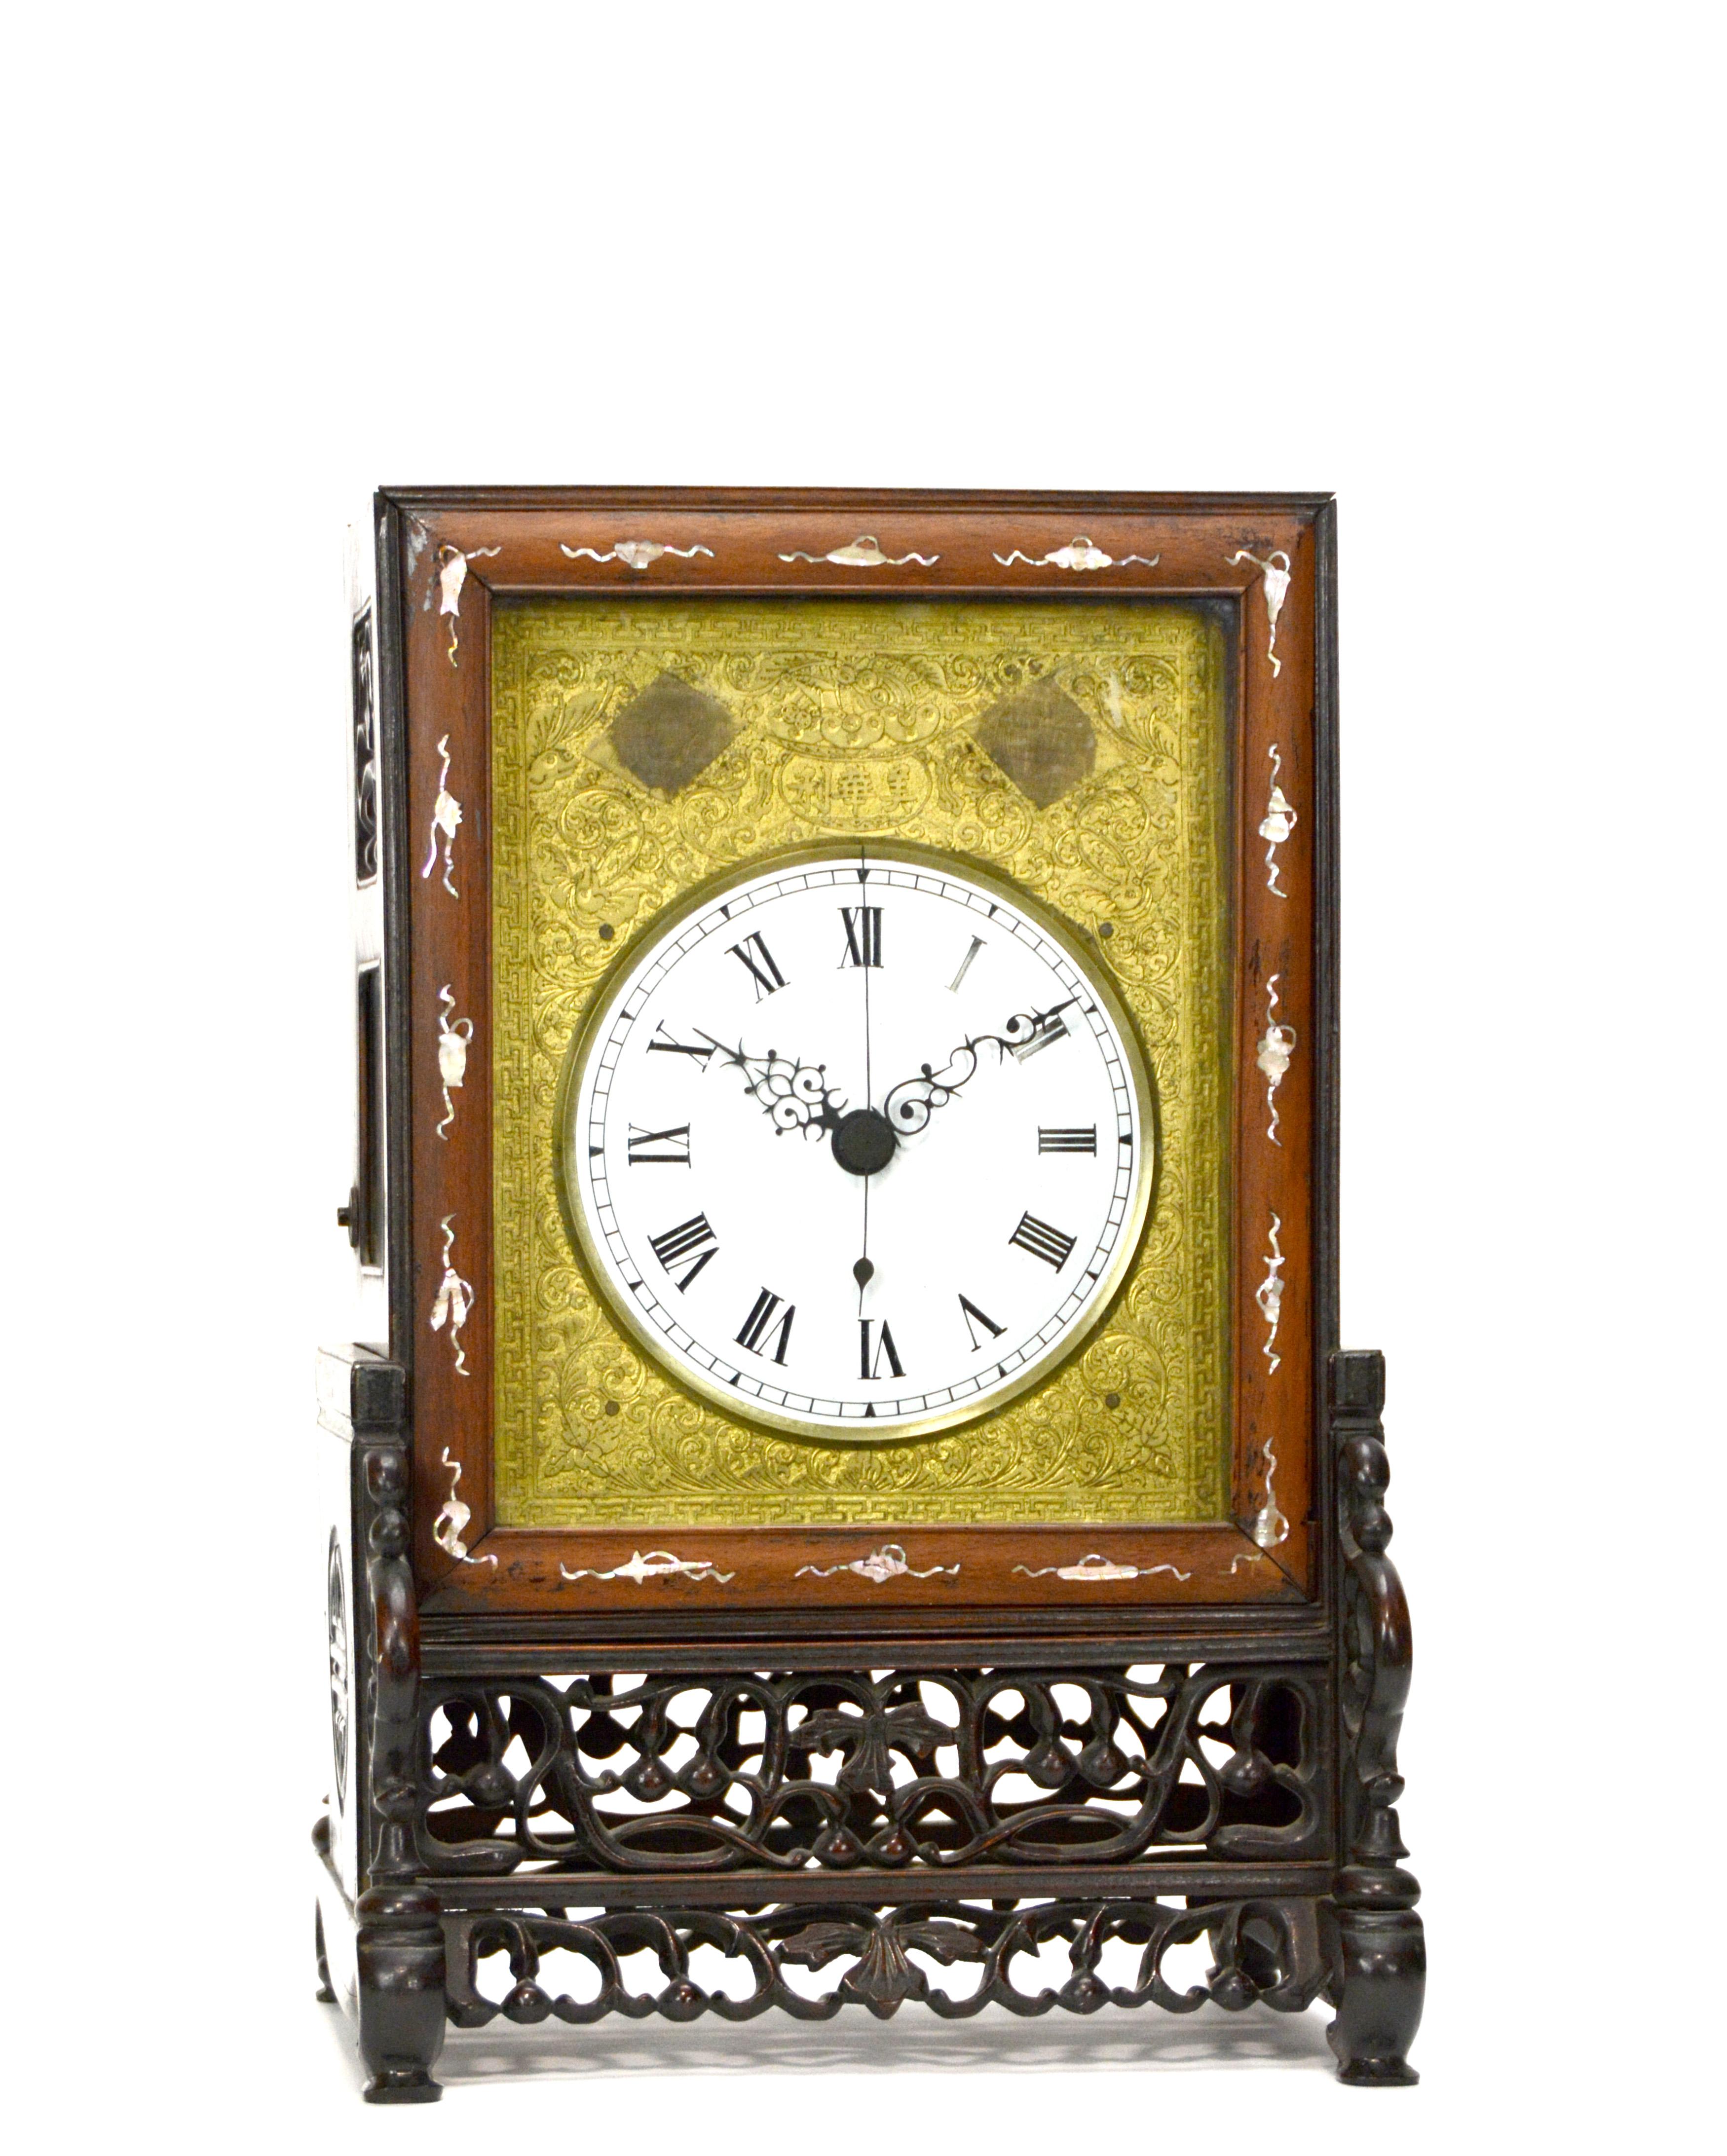 Antique Chinese Fusee 8 day quarter strike rosewood mother of pear bracket clock.

MOVEMENT: 8 day fusee chain driven wind up mechanism

FUNCTION: time with quarter striking

SIZE: 17-3/4